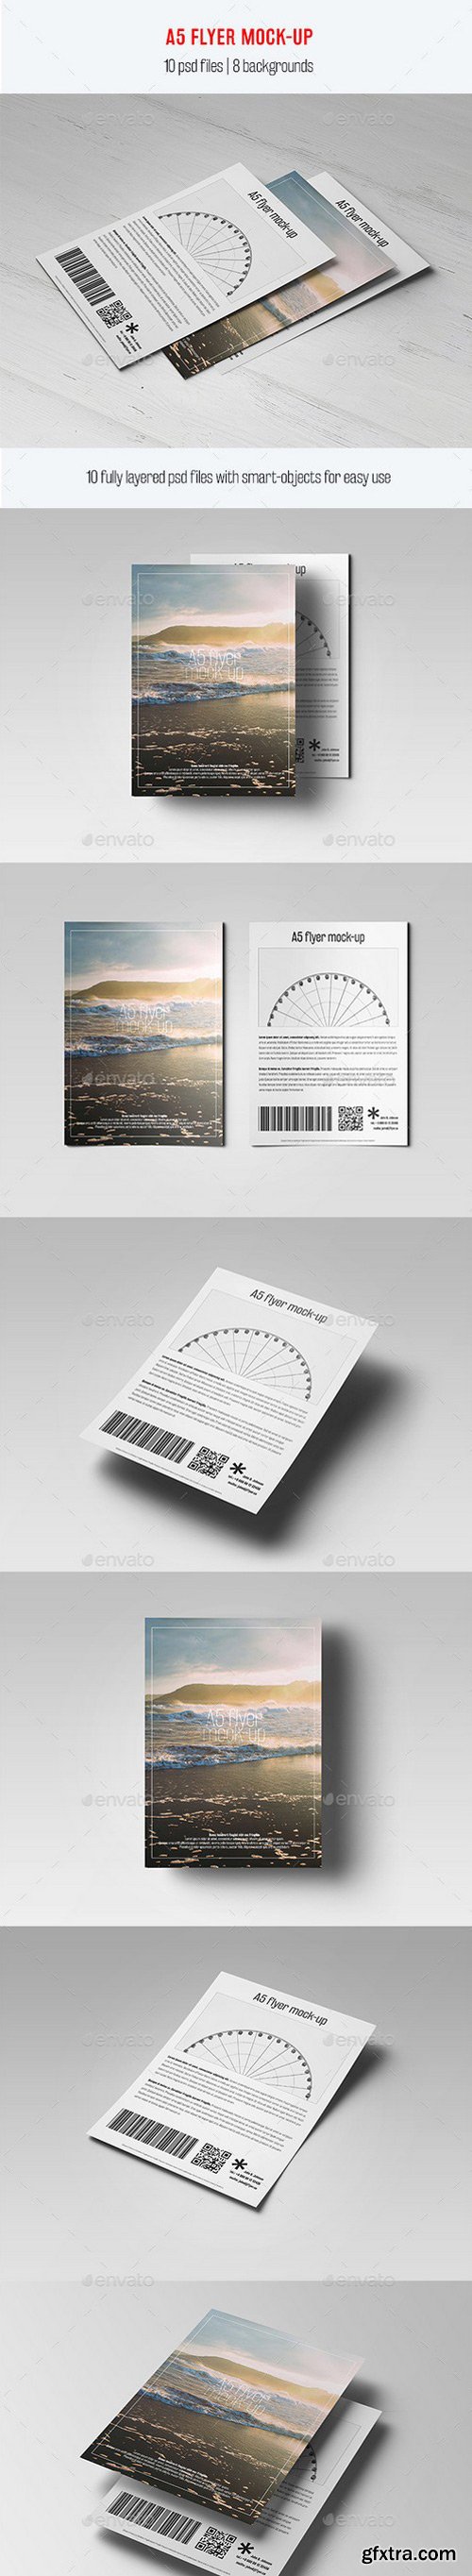 Graphicriver - A5 Flyer Mock-Up 11779682